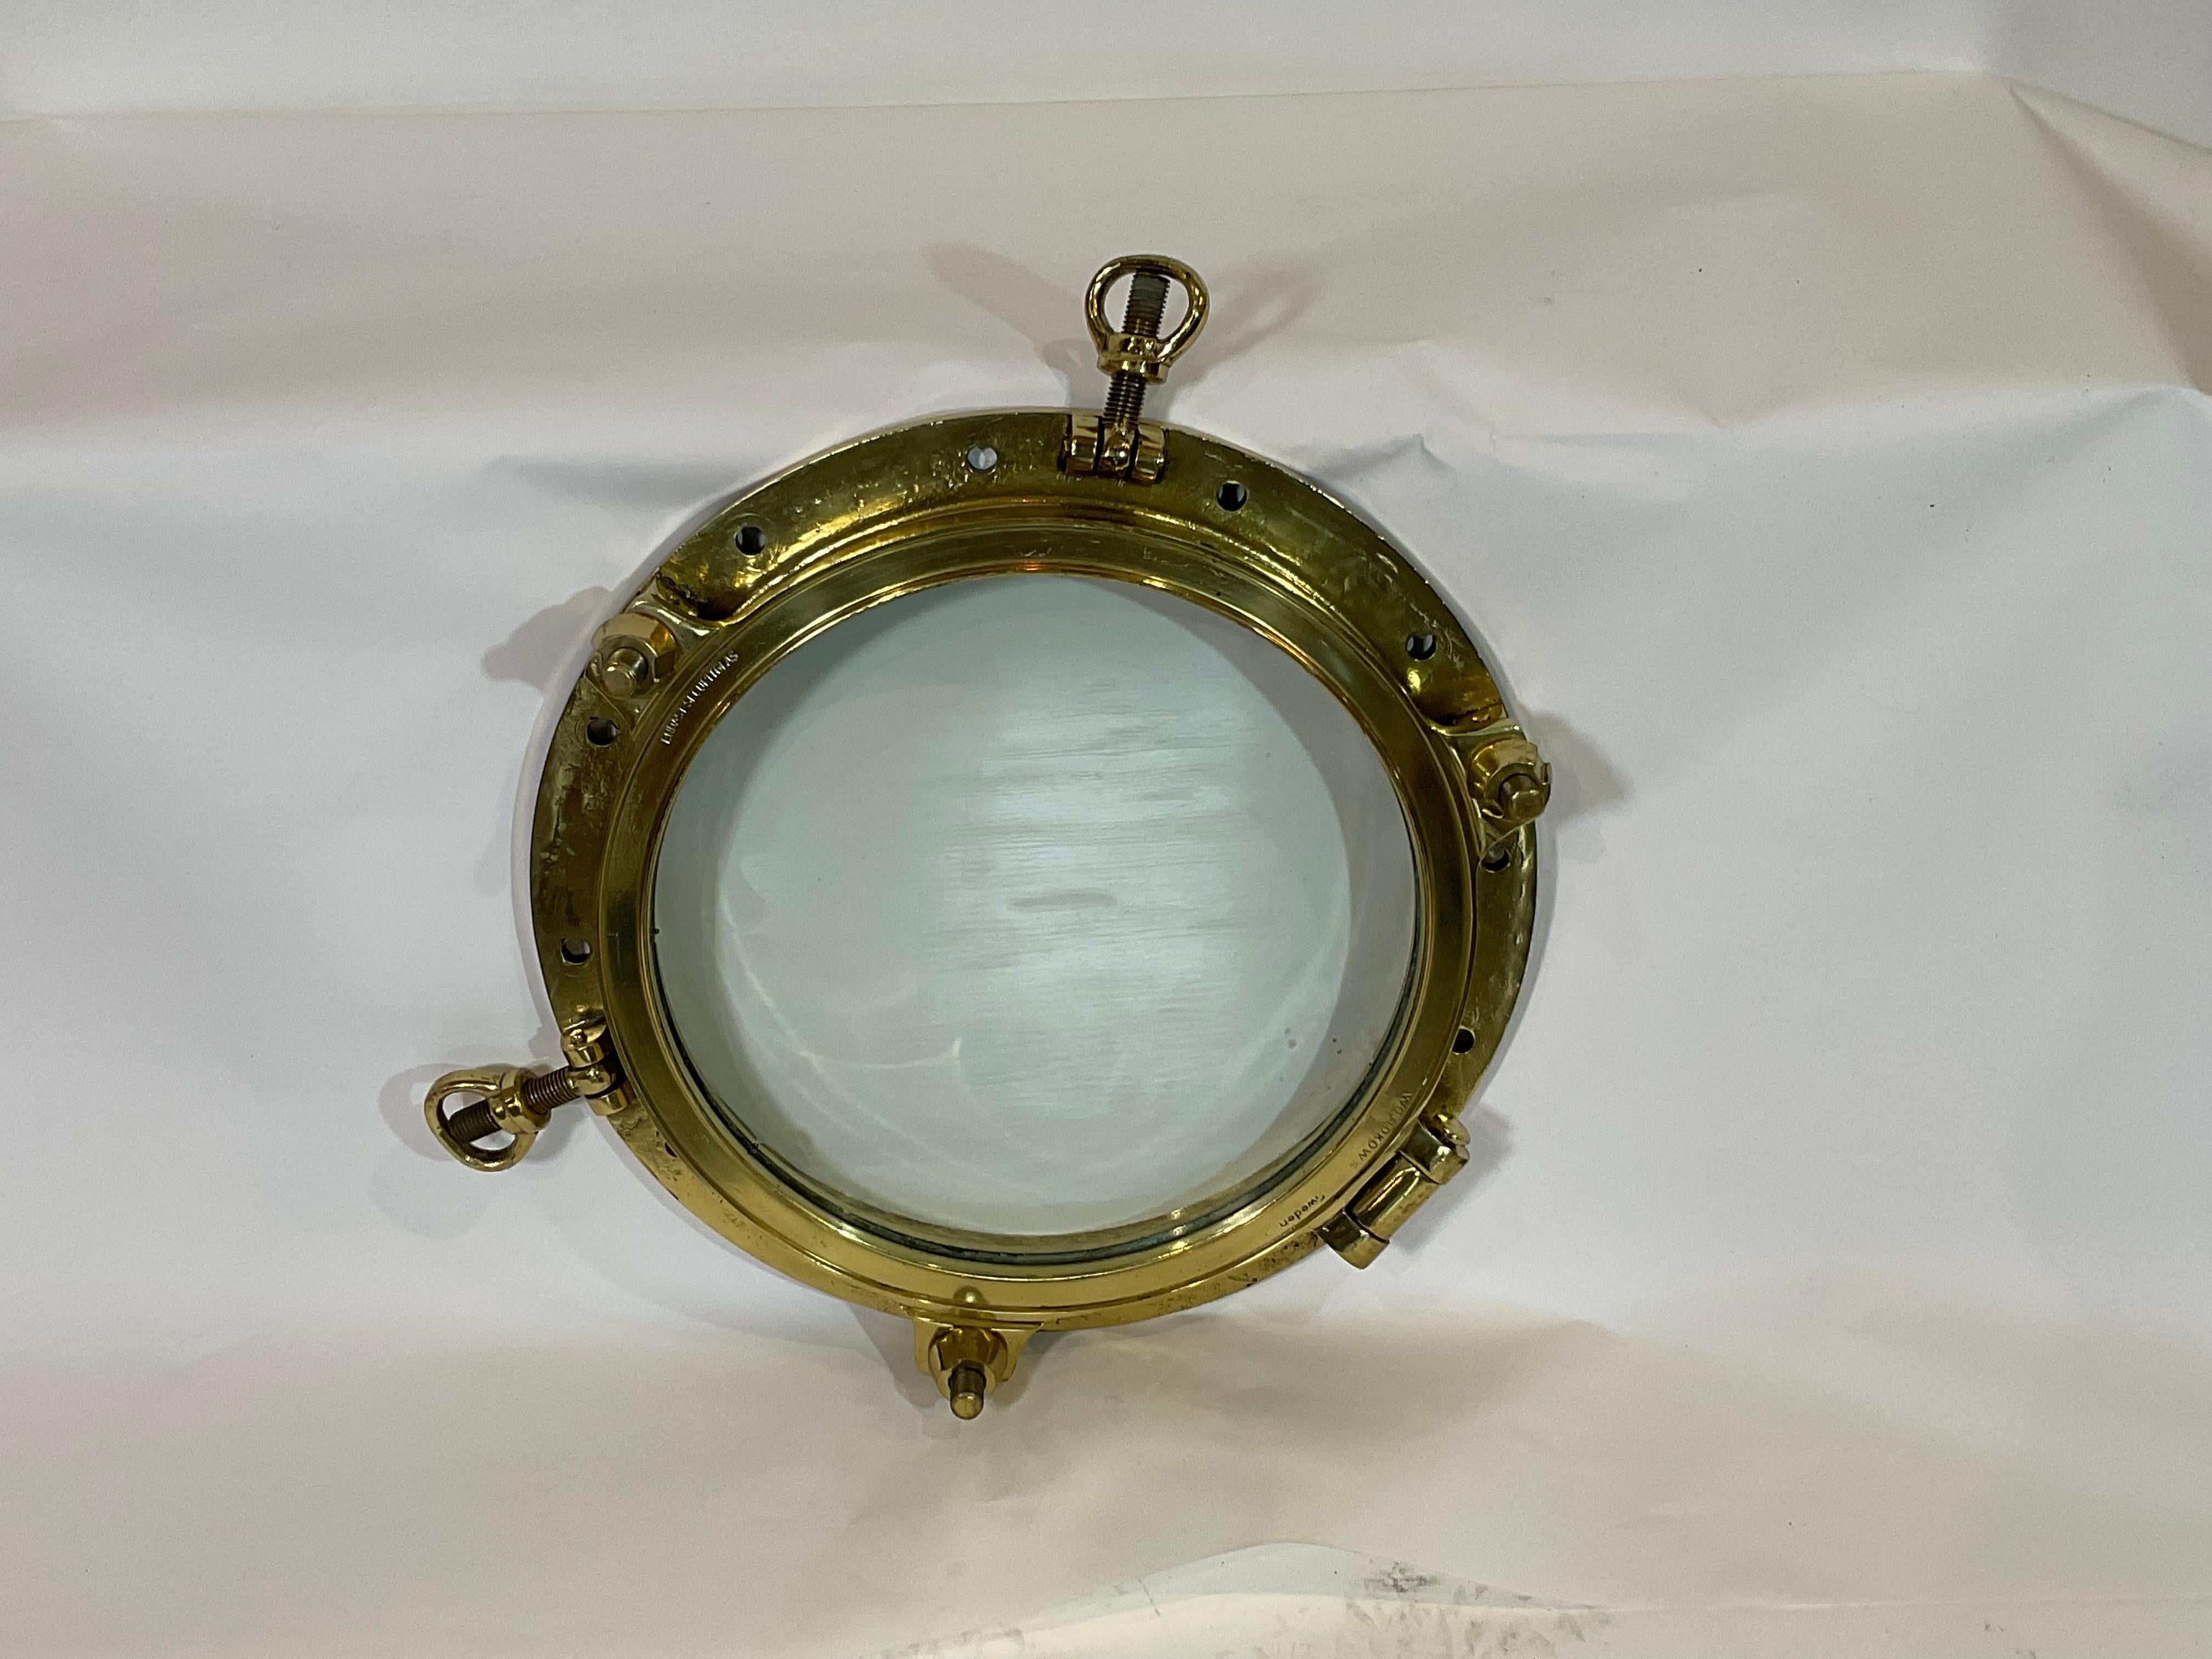 European Solid Brass Ships Porthole Highly Polished with Lacquer Finish For Sale